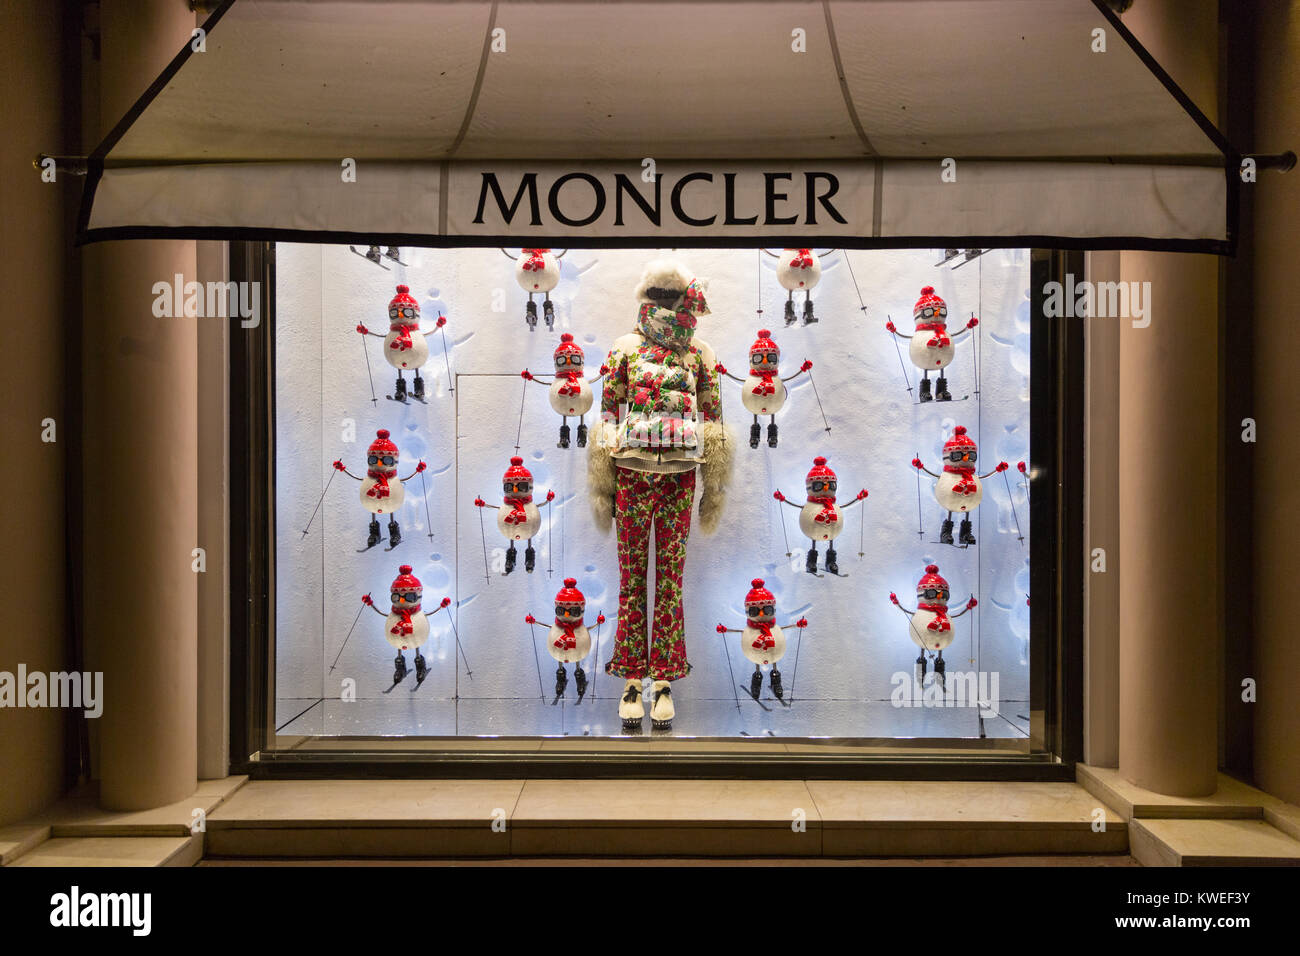 Moncler designer apres ski winter fashion and decorations in a store shop  window, Cannes, France Stock Photo - Alamy